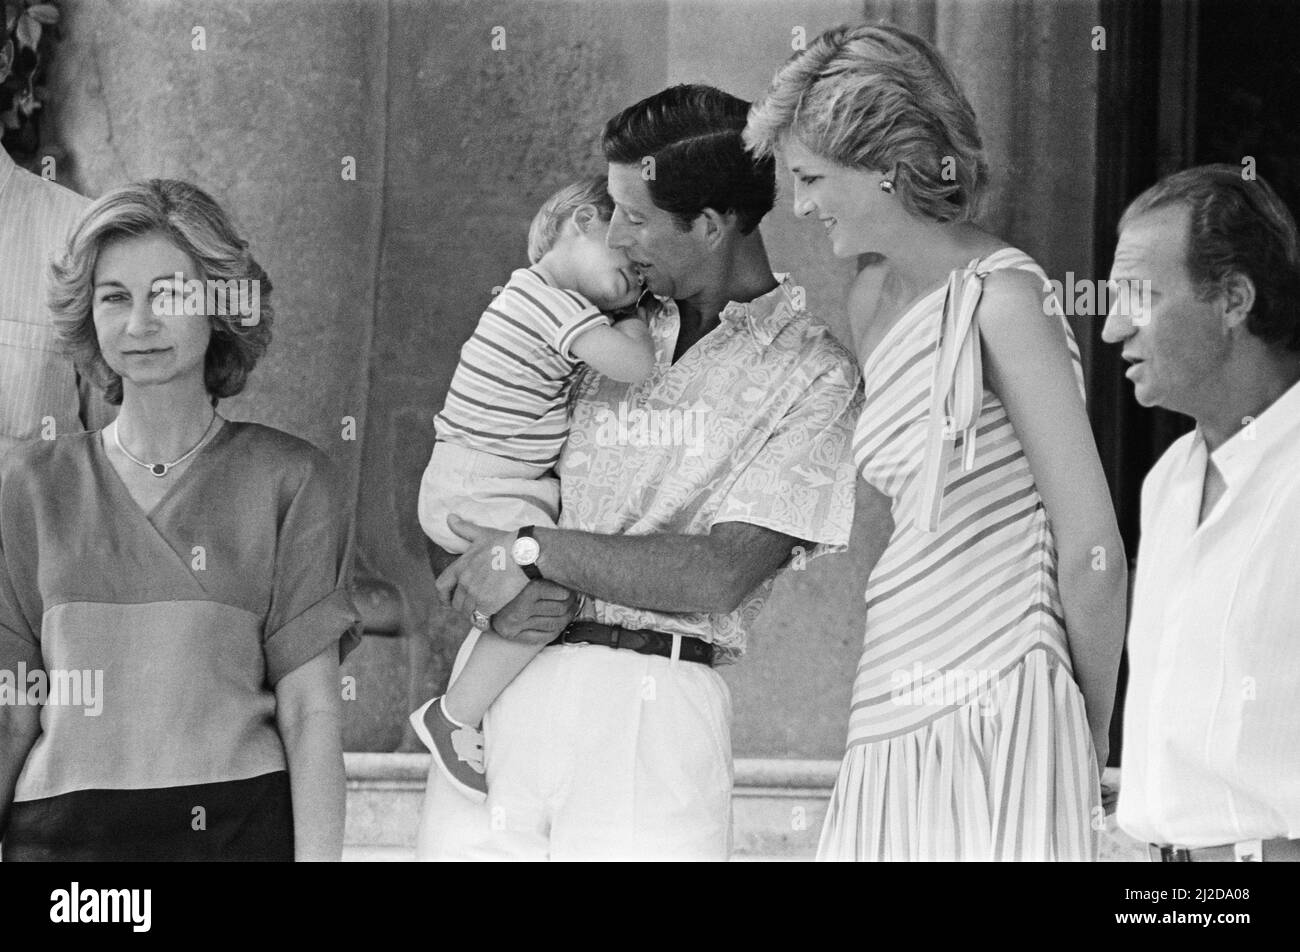 HRH Princess Diana, The Princess of Wales and her husband HRH Prince Charles, The Prince of Waleson holiday in Palma, Majorca. They are the guests of King Juan Carlos (right) and his wife Sofia (left) , and are pictured here at Marivent Palace, Palma, Majorca.  In this picture Prince Charles holds a sleepy nearly 2 year old Prince Harry. Picture taken 9th August 1986 Stock Photo